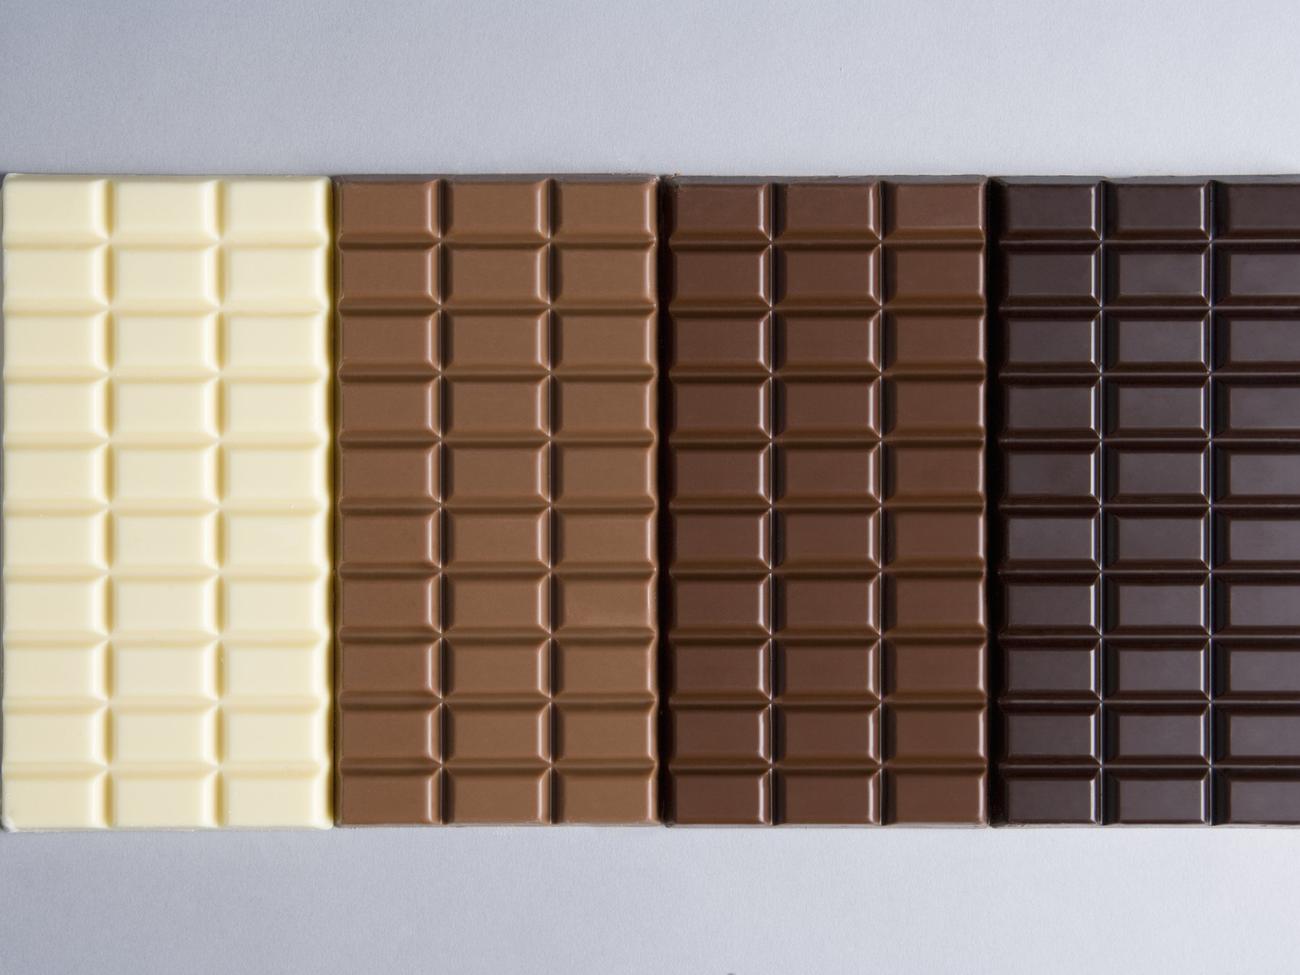 Why You Should Eat Chocolate in the Morning